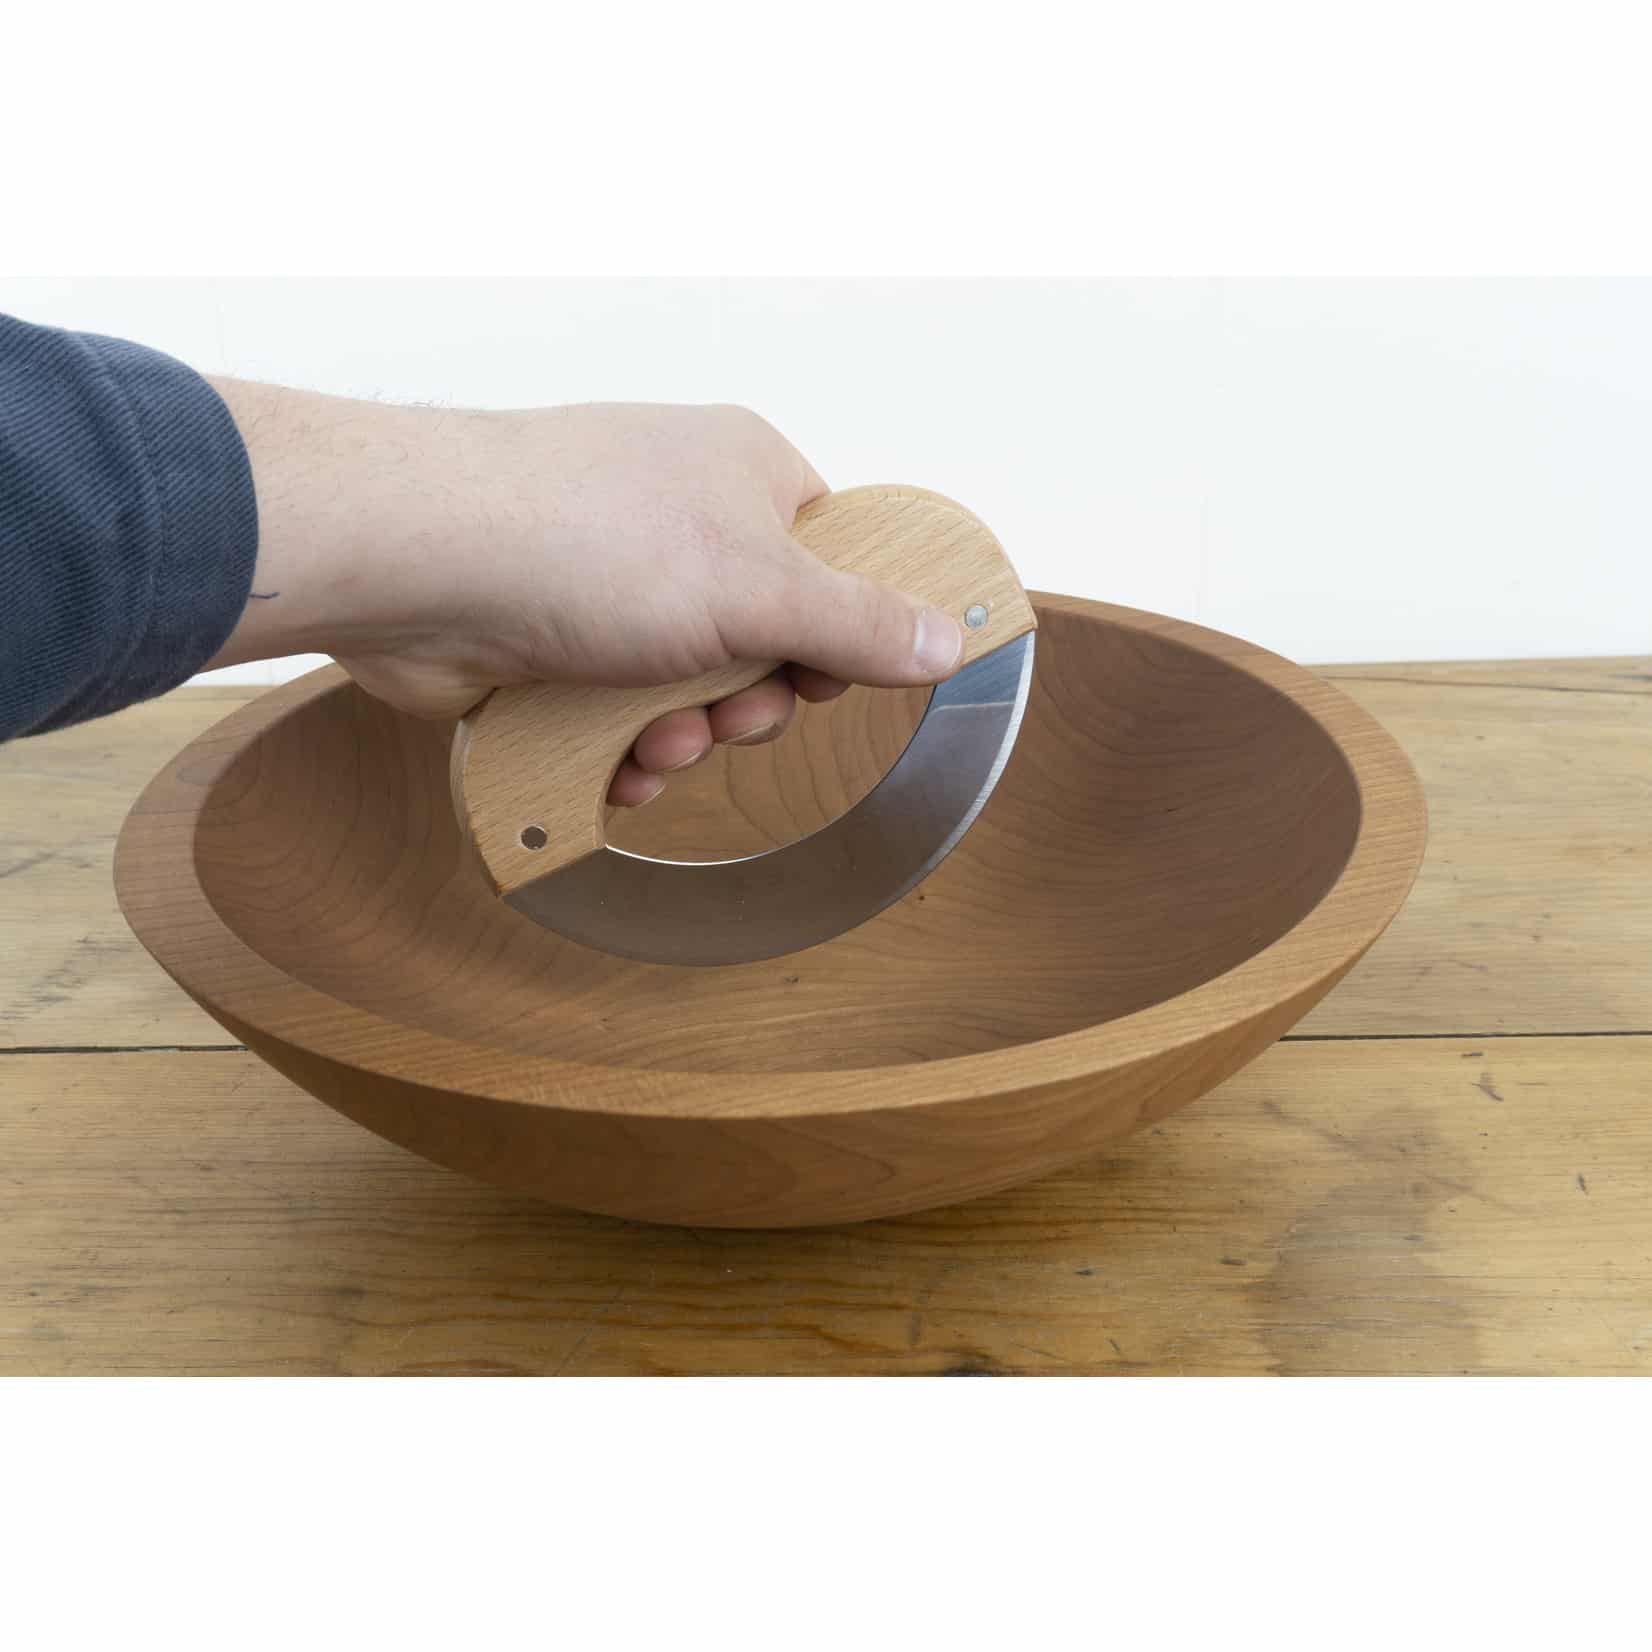 Wooden Salad Chopping Bowl with knife